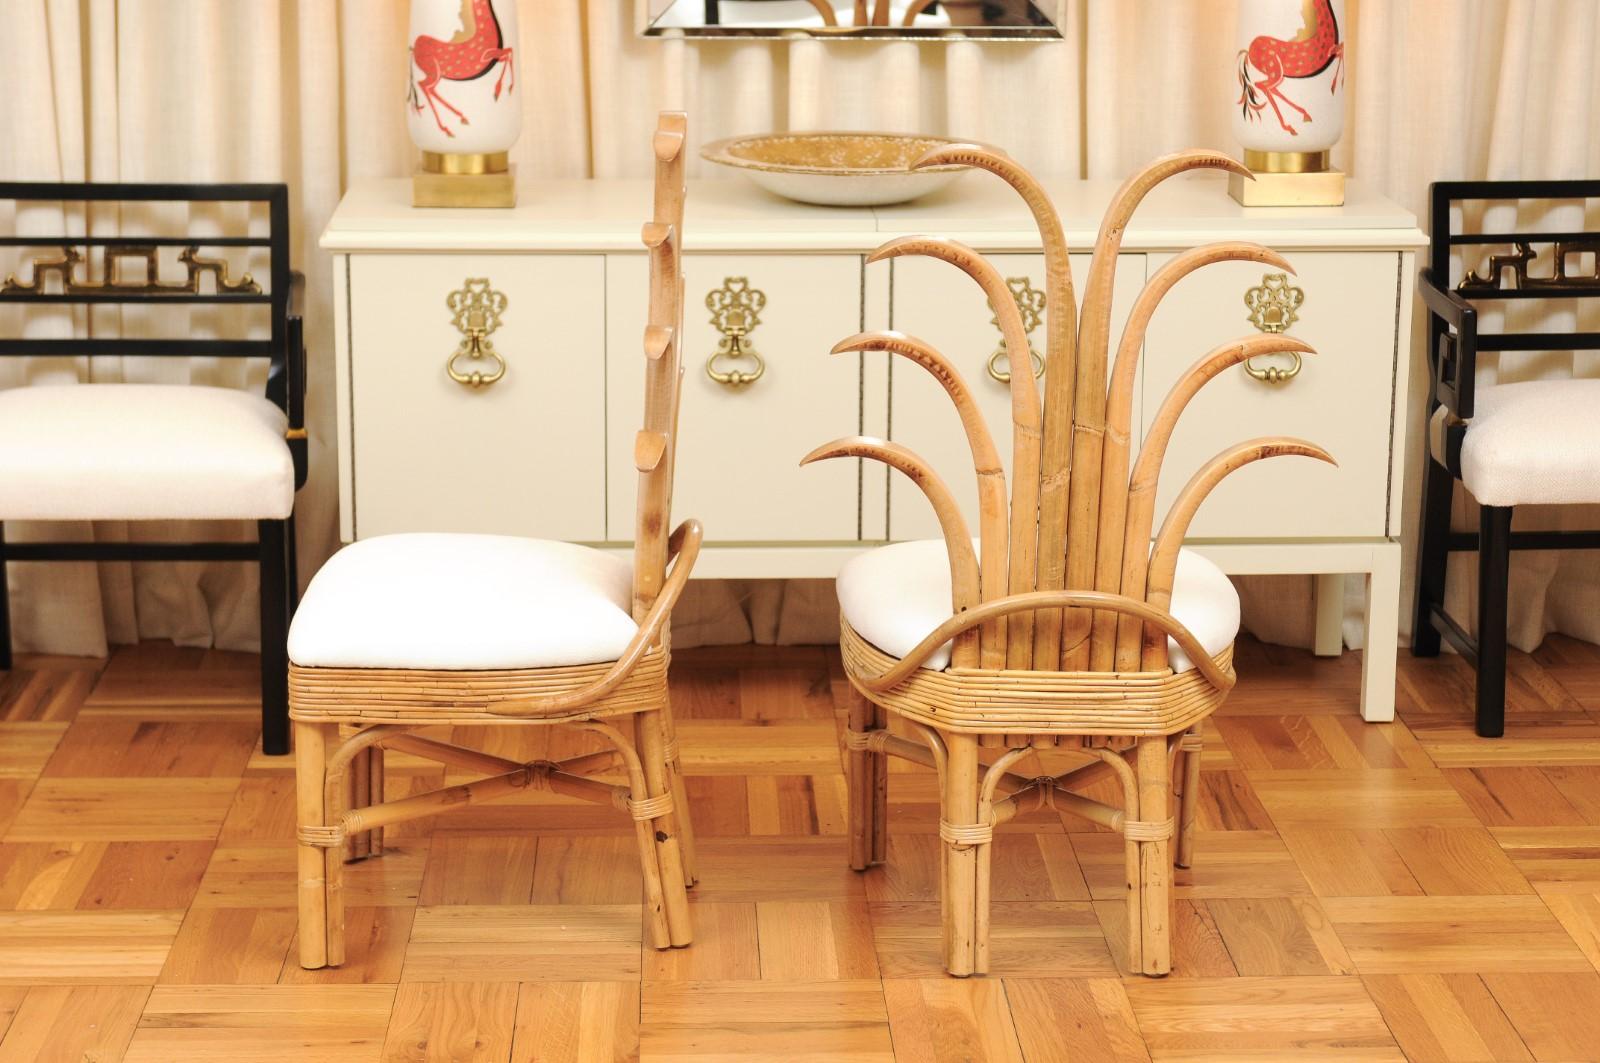 Exquisite Set of 12 Rattan and Cane Palm Frond Dining Chairs, circa 1950 For Sale 5